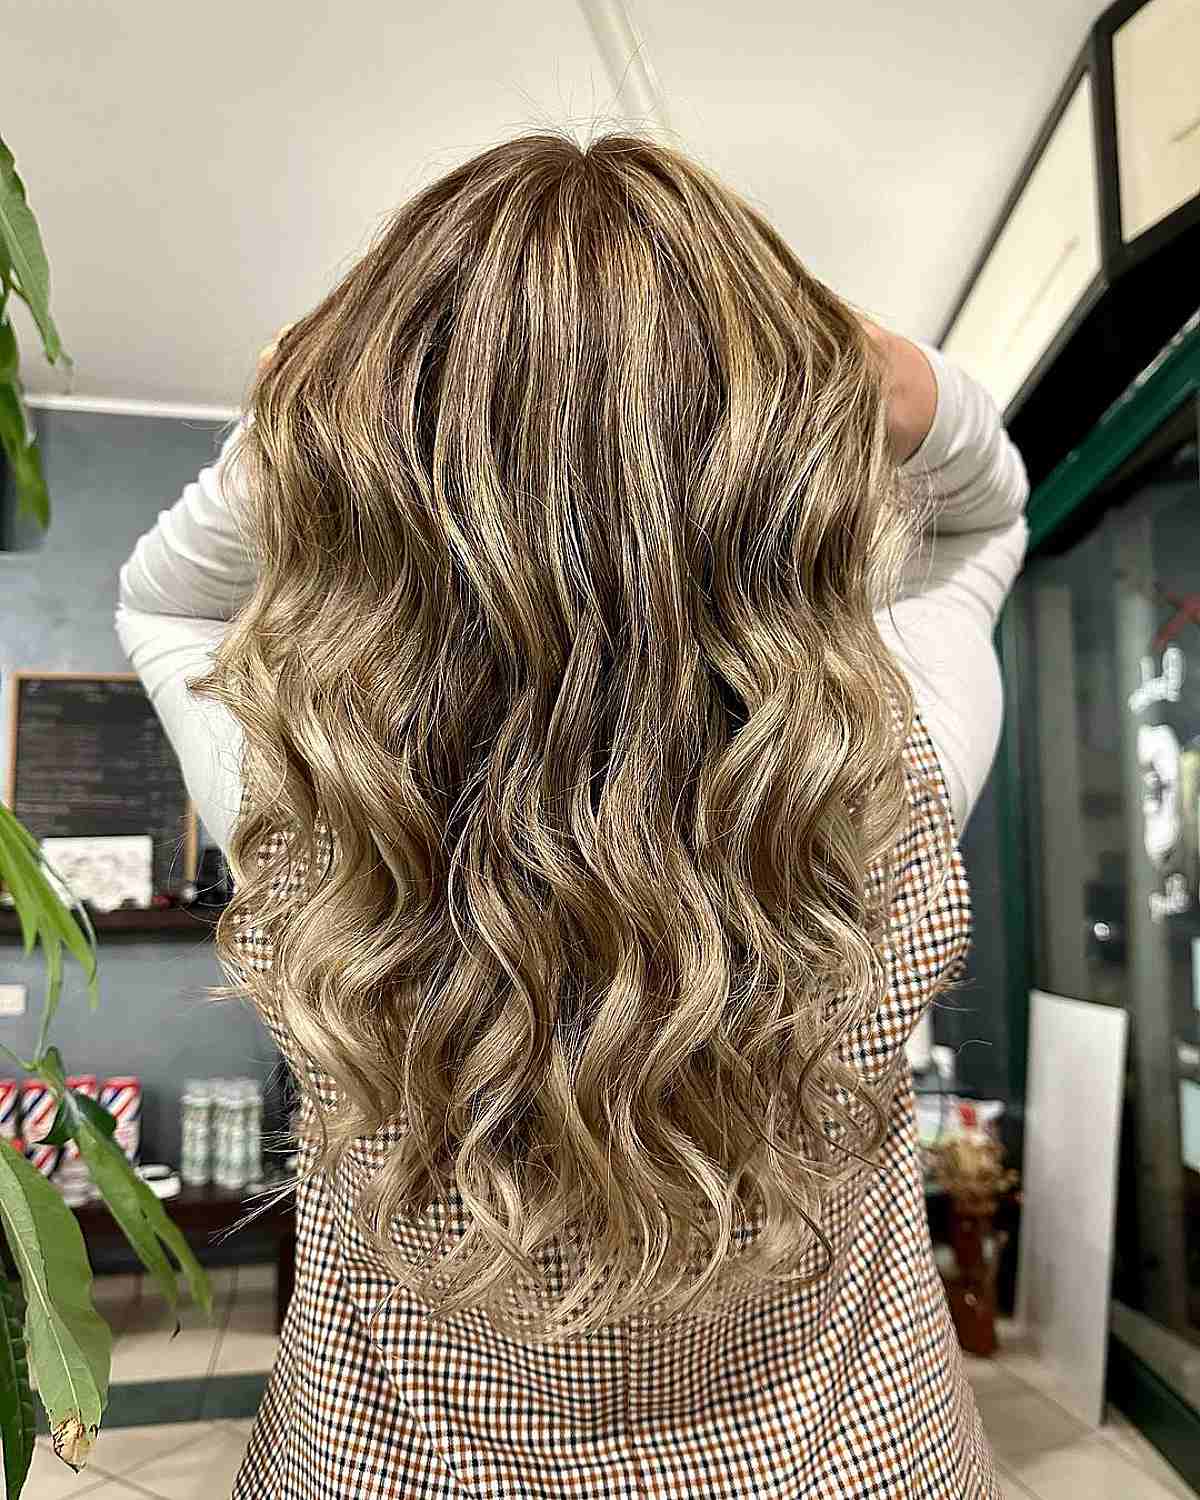 30 Stunning Examples of Brown and Blonde Hair